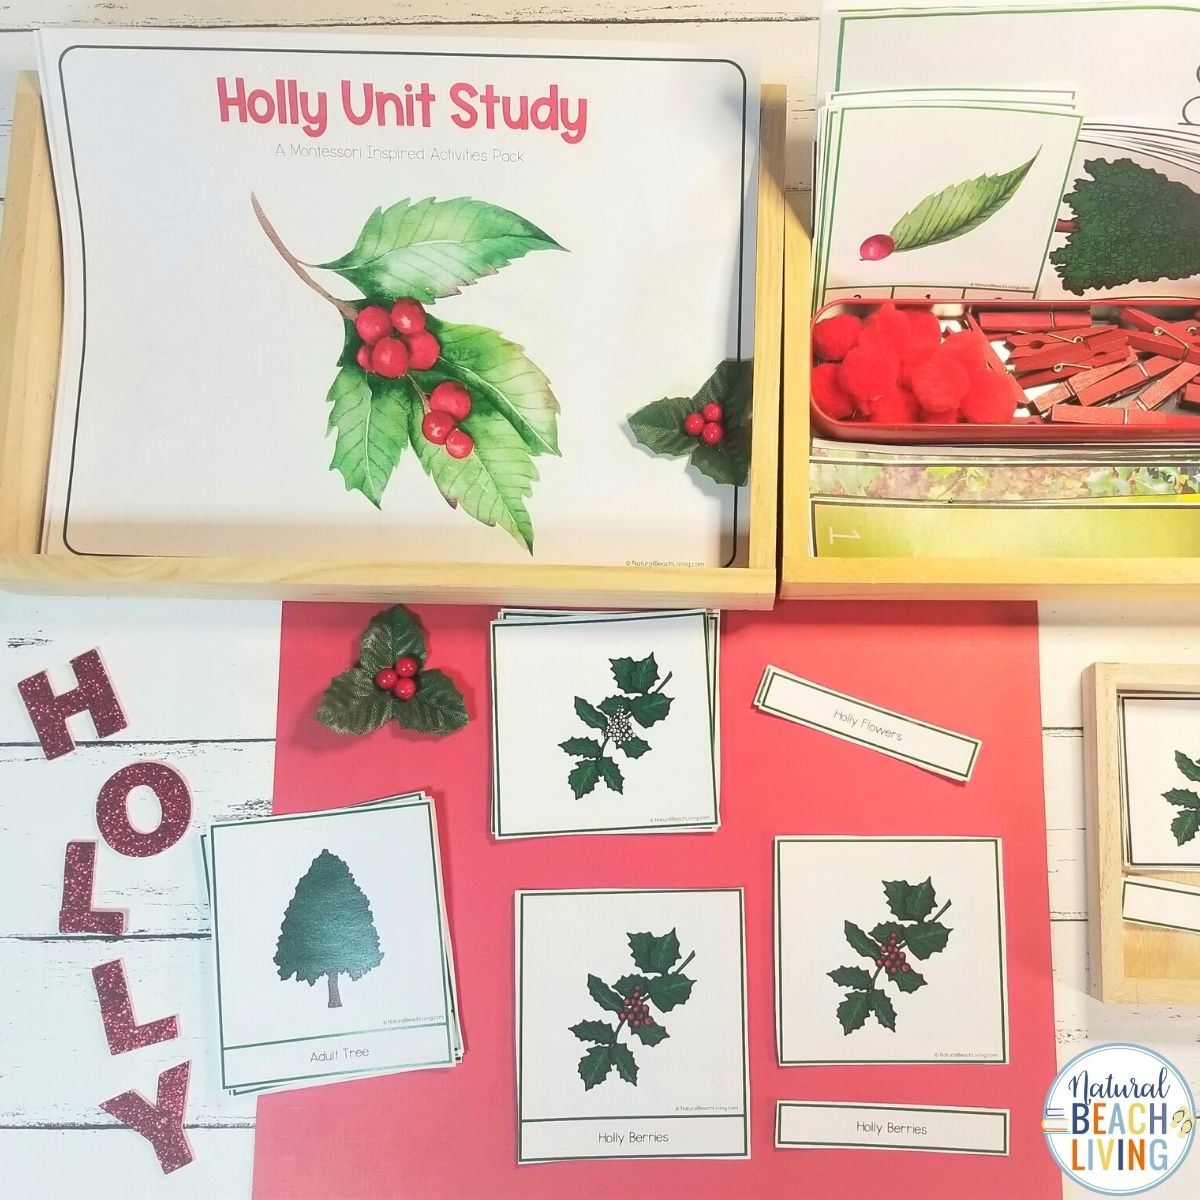 Holly Tree Theme Unit for 3-9 year olds. This is an amazing winter theme full of learning opportunities. You'll get Montessori 3 part cards, Holly Coloring Pages, Holly Tree Handwriting Pages, Winter Poetry and Writing Prompts, Holly Tree Life Cycle with Control Chart, Holly Tree Sequencing Cards, and Tons of early math skills activities